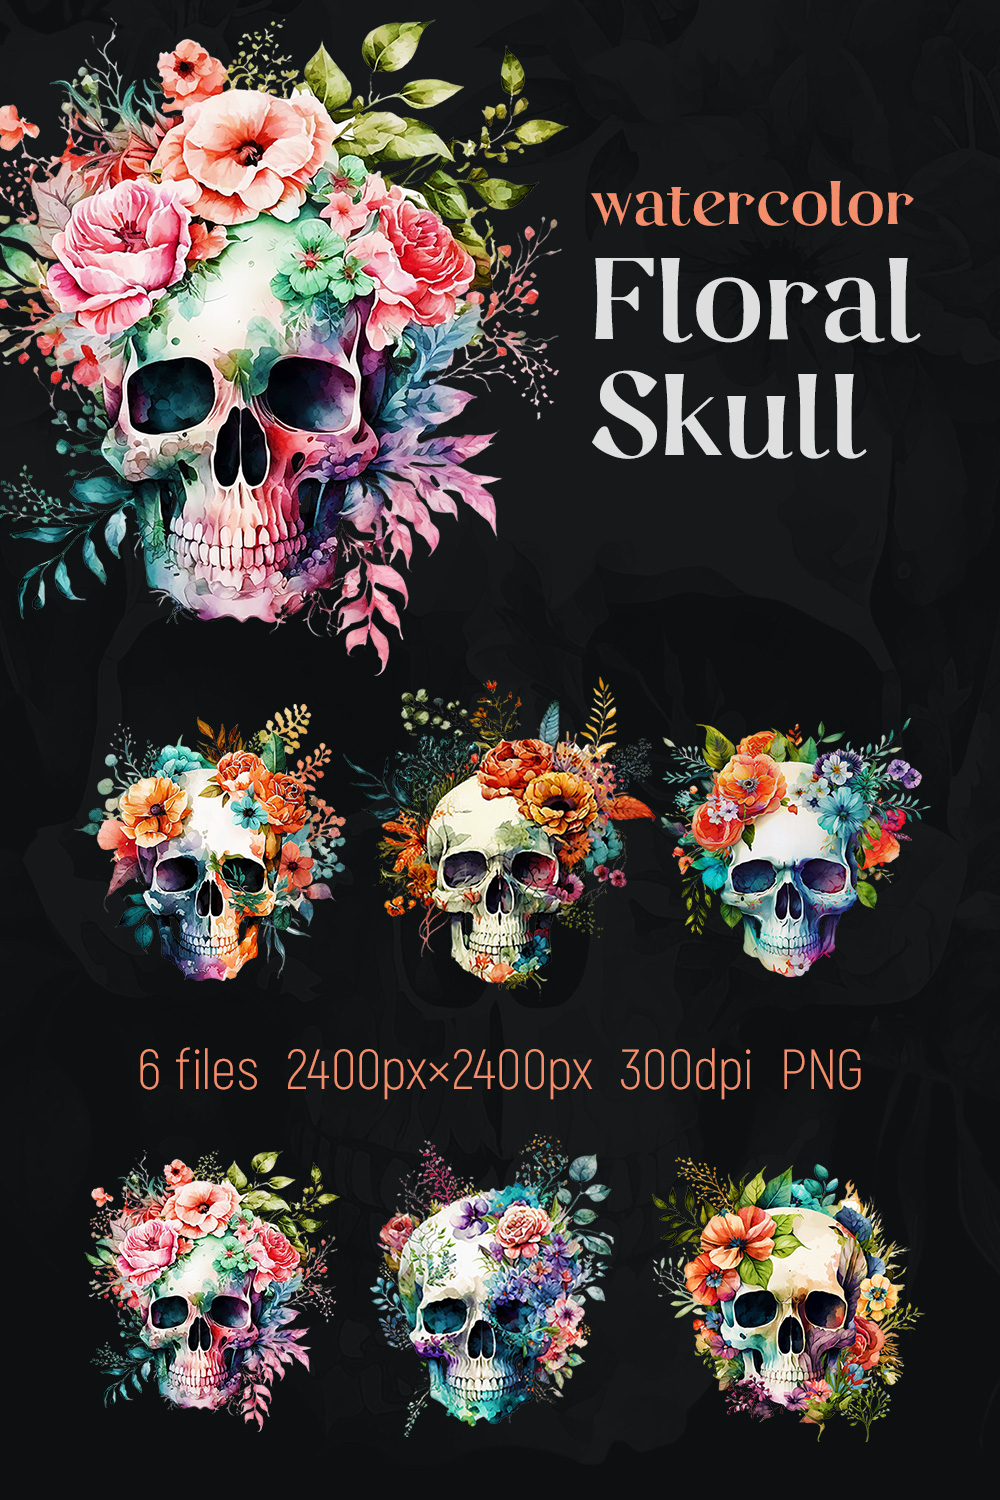 Watercolor Floral Skull pinterest preview image.